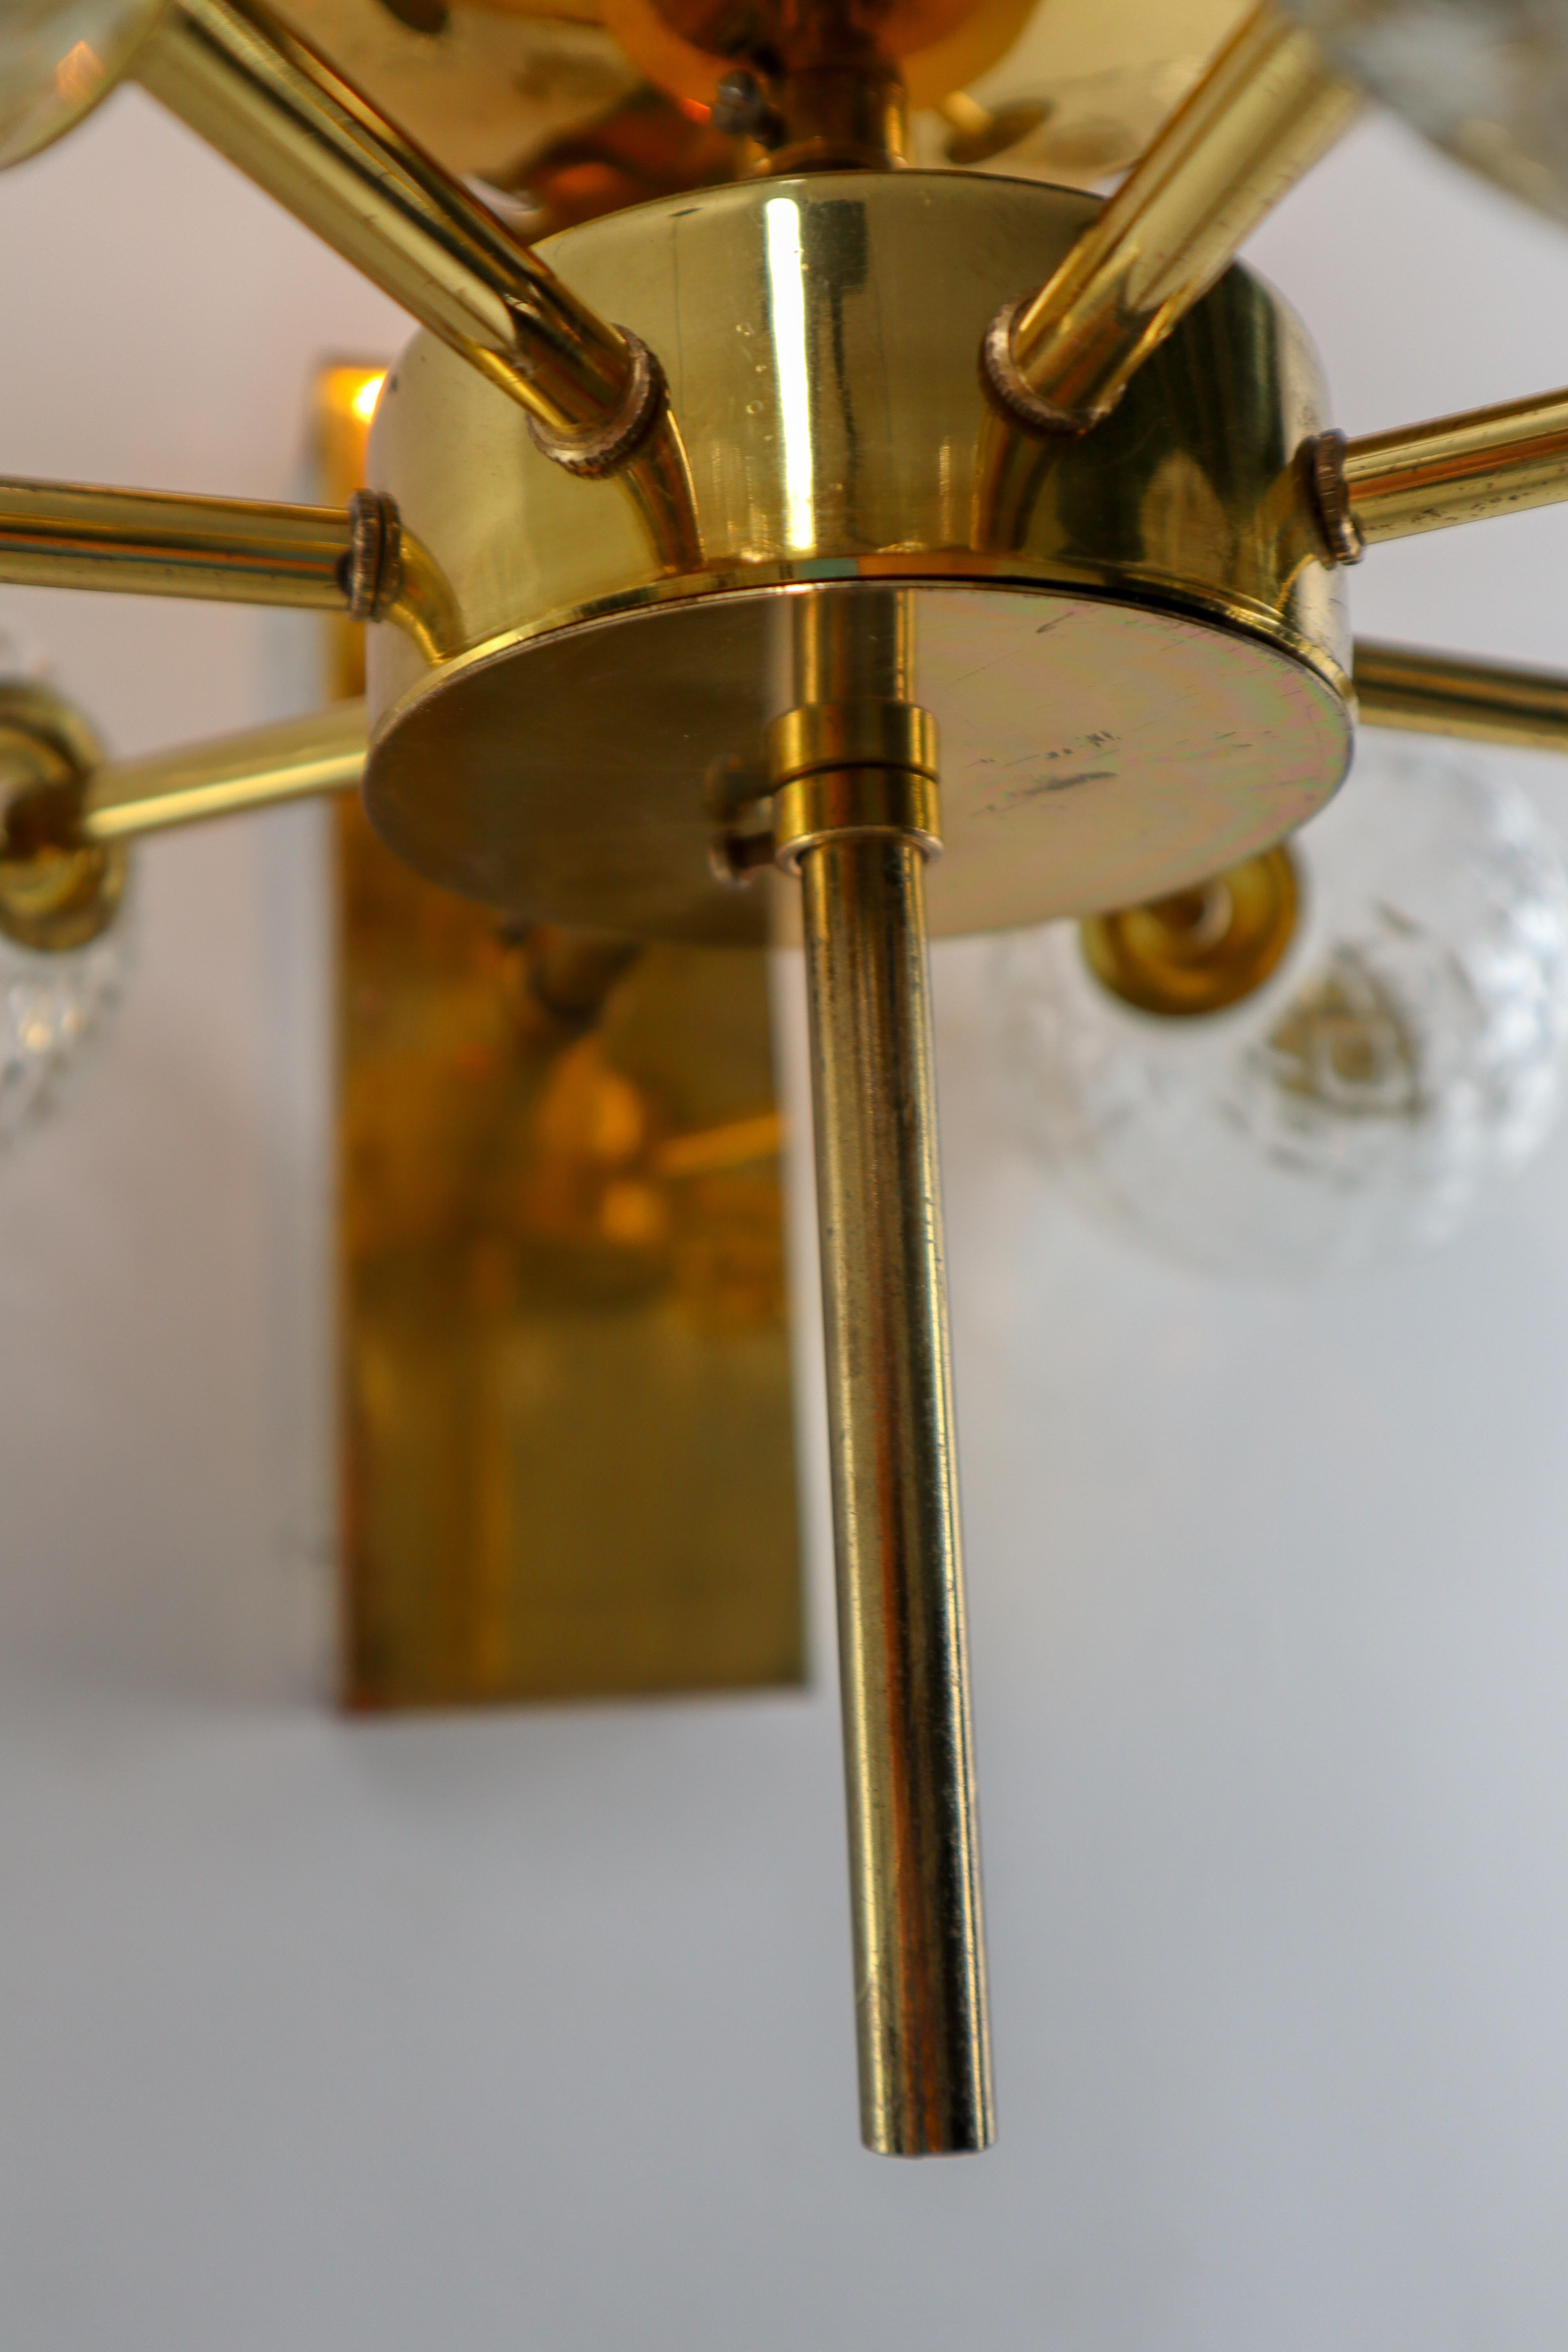 Hotel Wall Chandeliers with Brass Fixture, European, 1970s For Sale 2